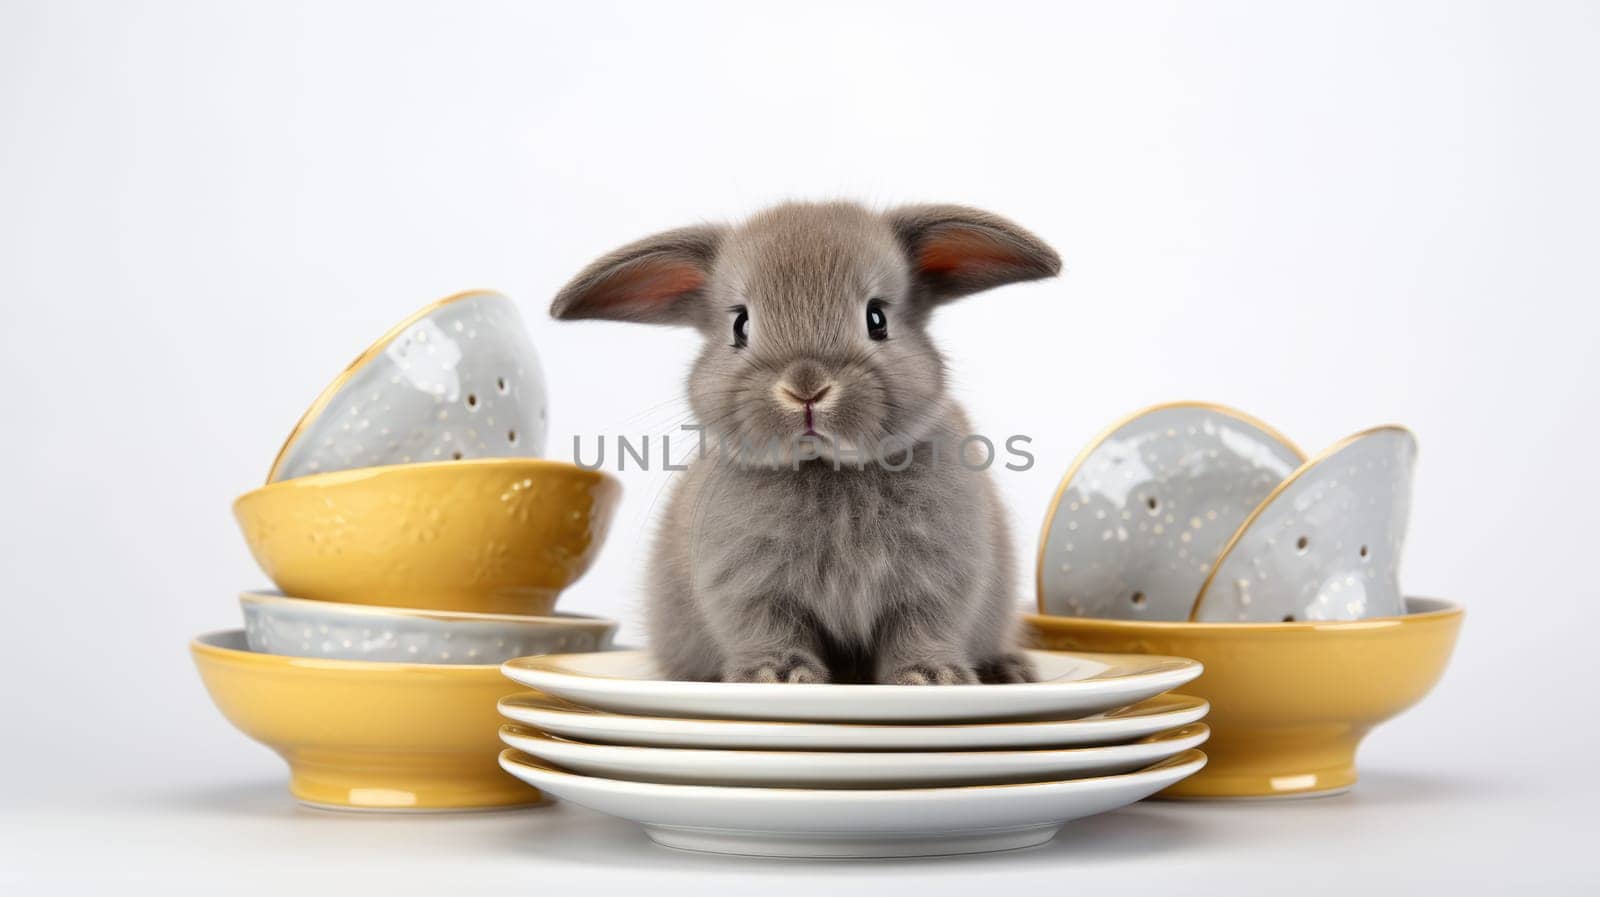 Small gray rabbit sits between stacks of ceramic bowls and plates on white background. Easter bunny by JuliaDorian